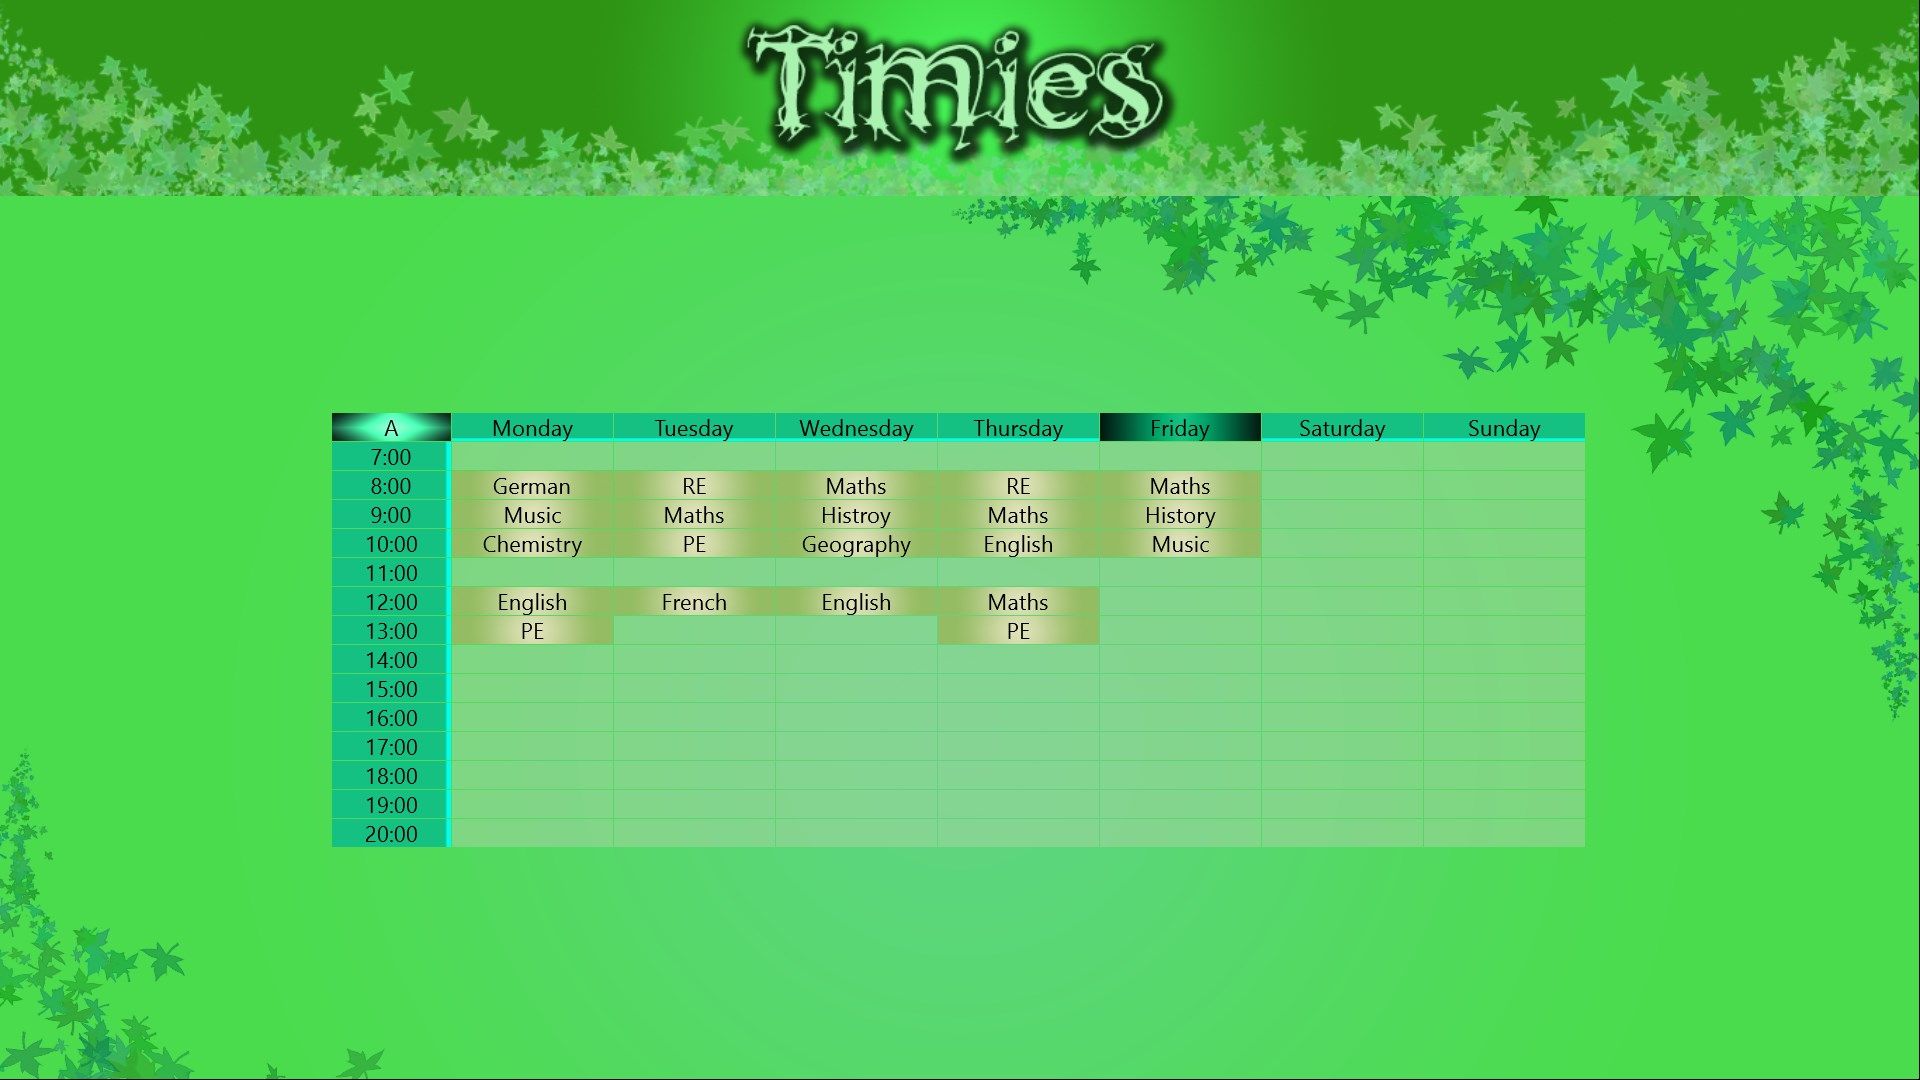 You can add your lessons to the Timetable